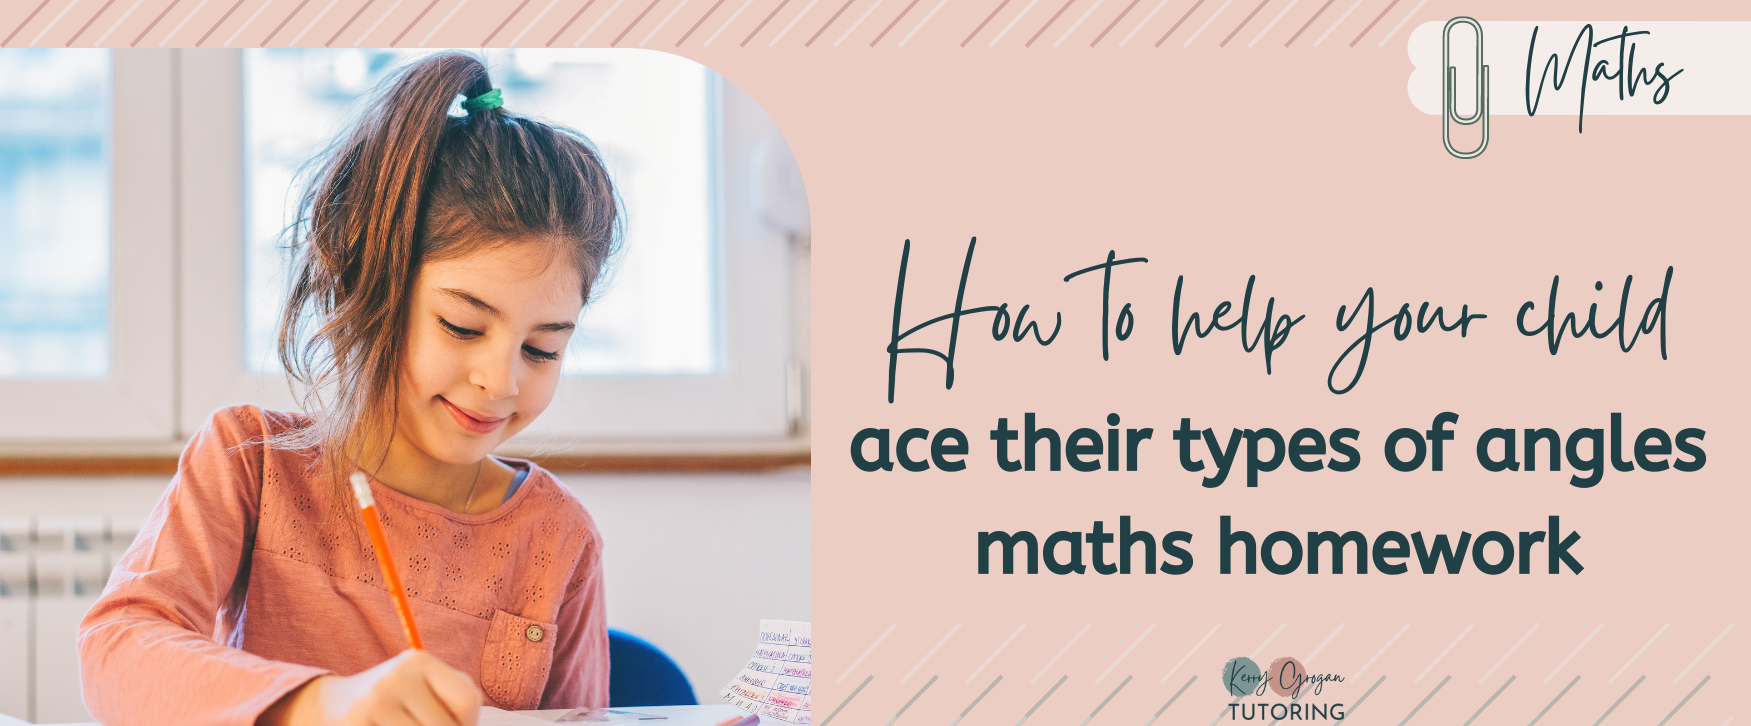 How to help your child ace their types of angles maths homework